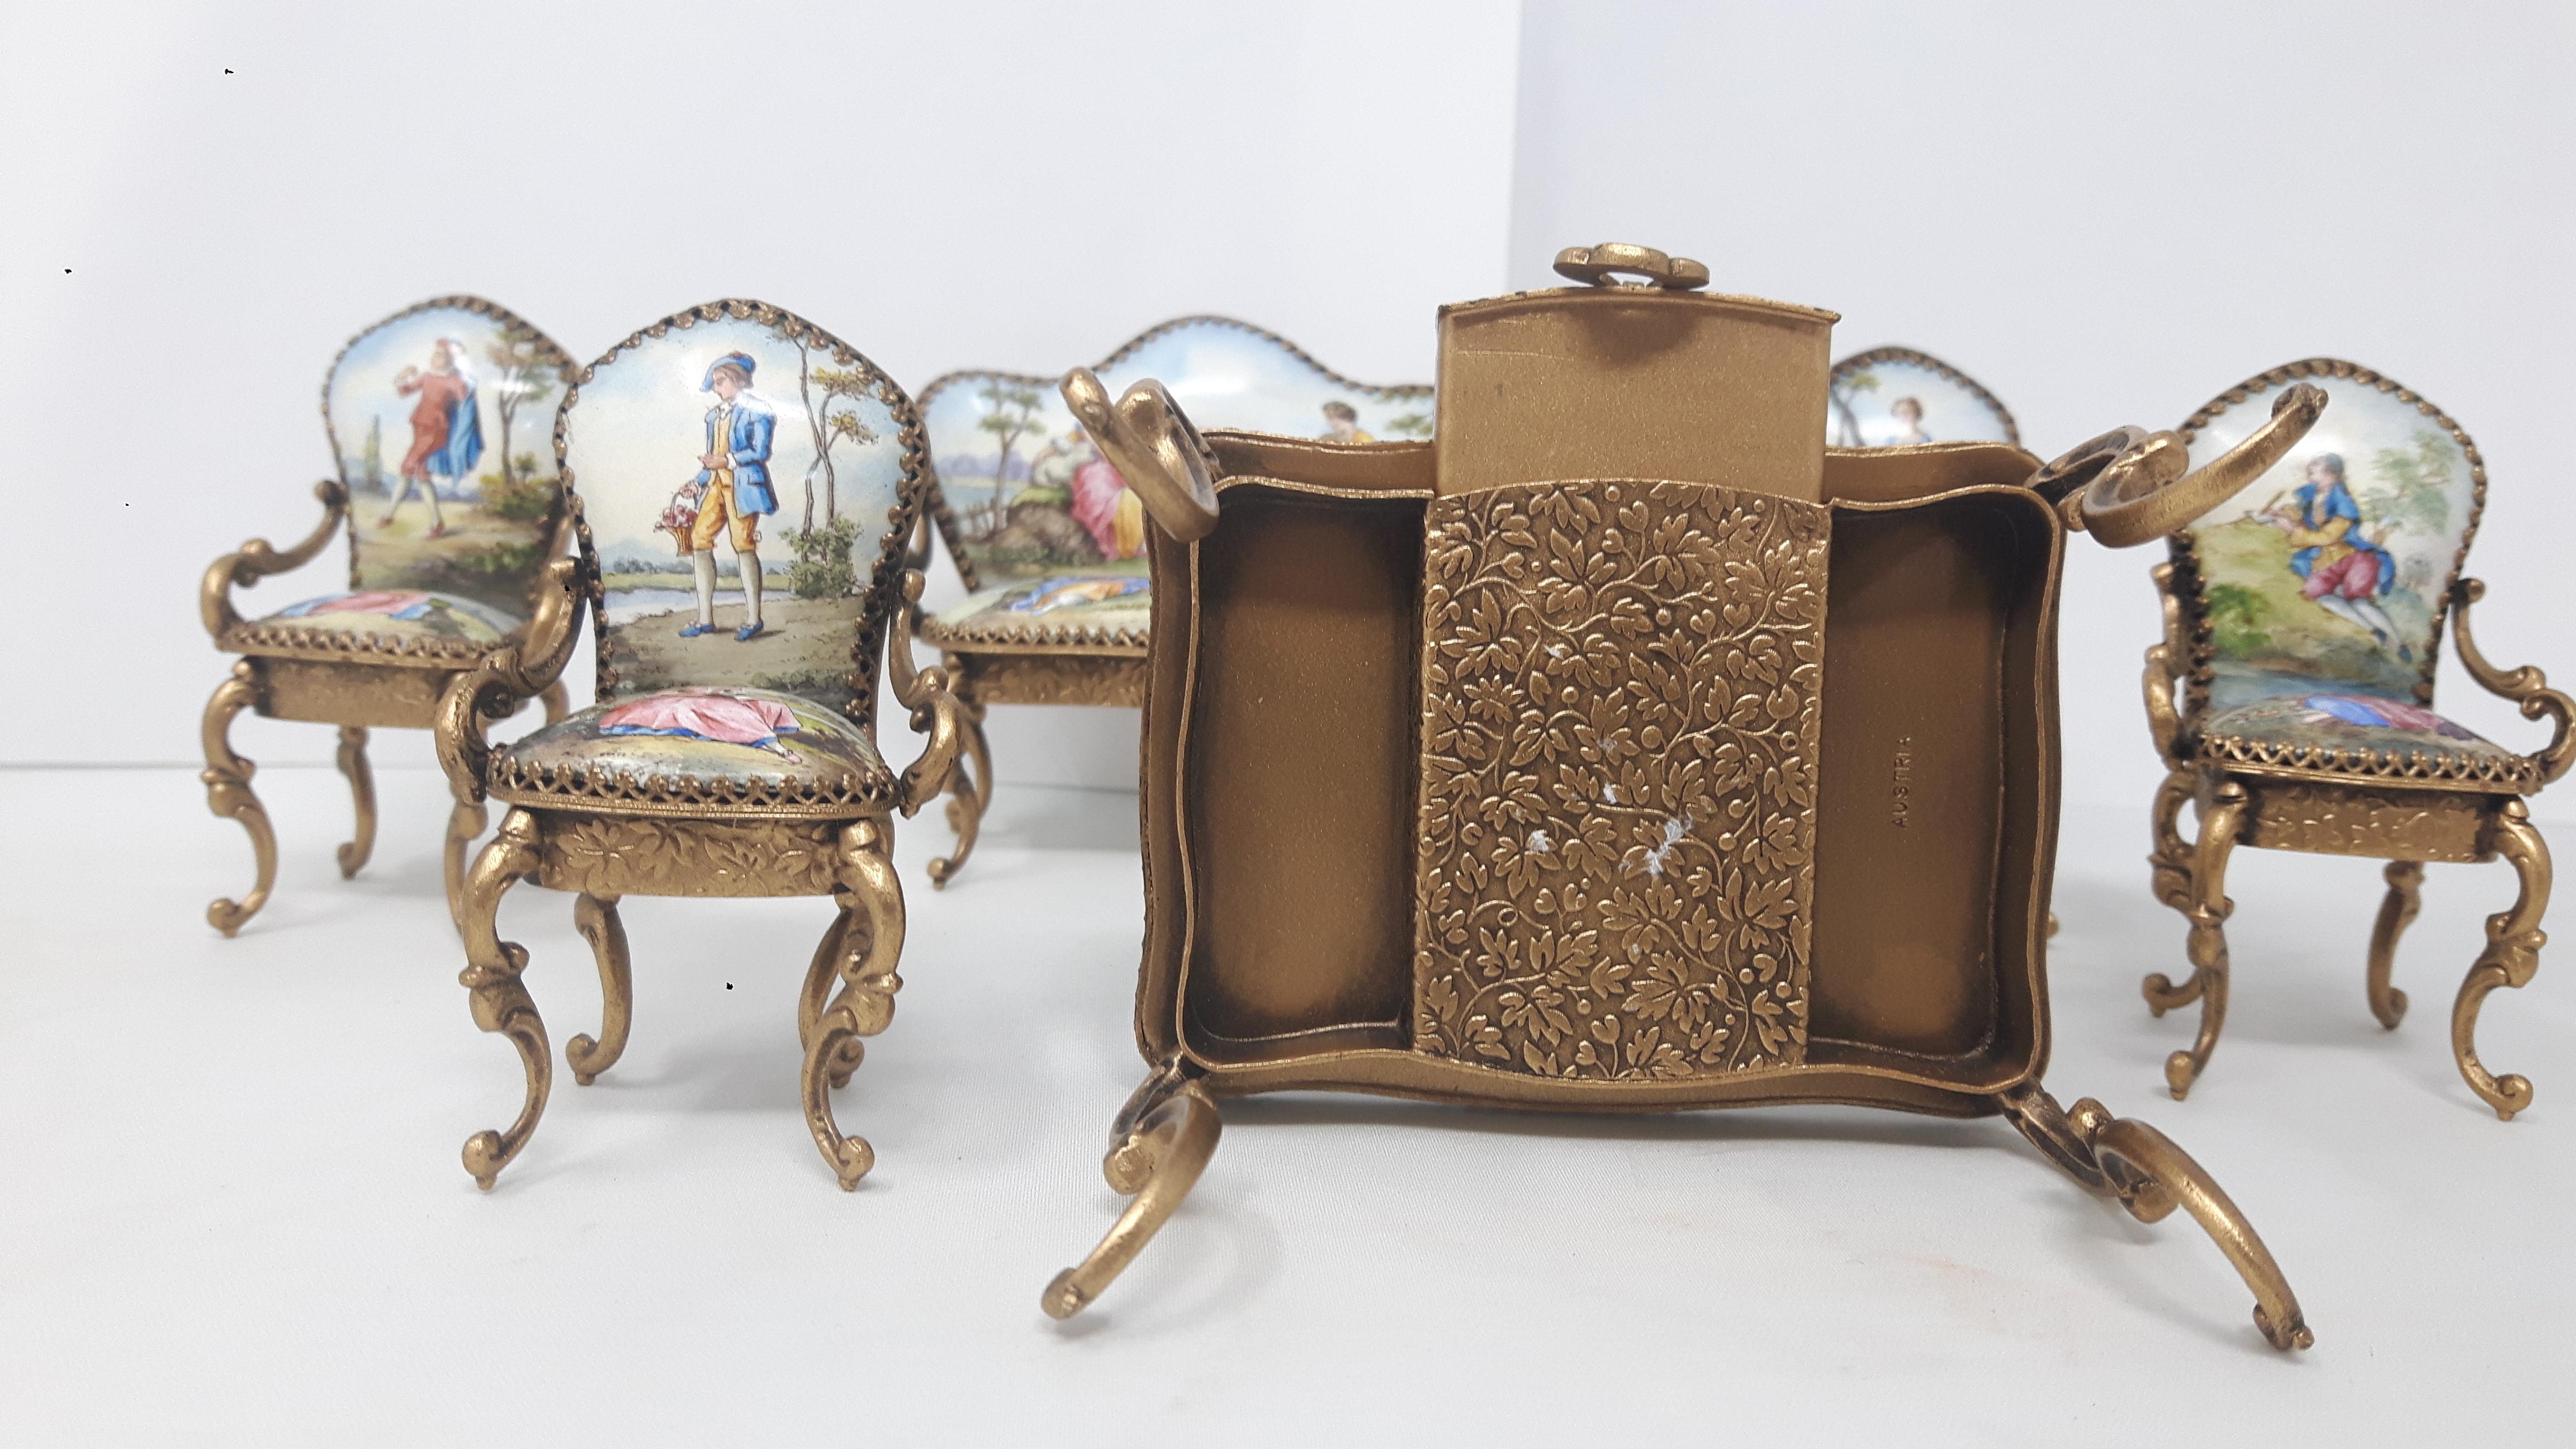 Enamel Dollhouse furniture, consists of table, settee and four chairs, decorated with single figures and romantic scenes.